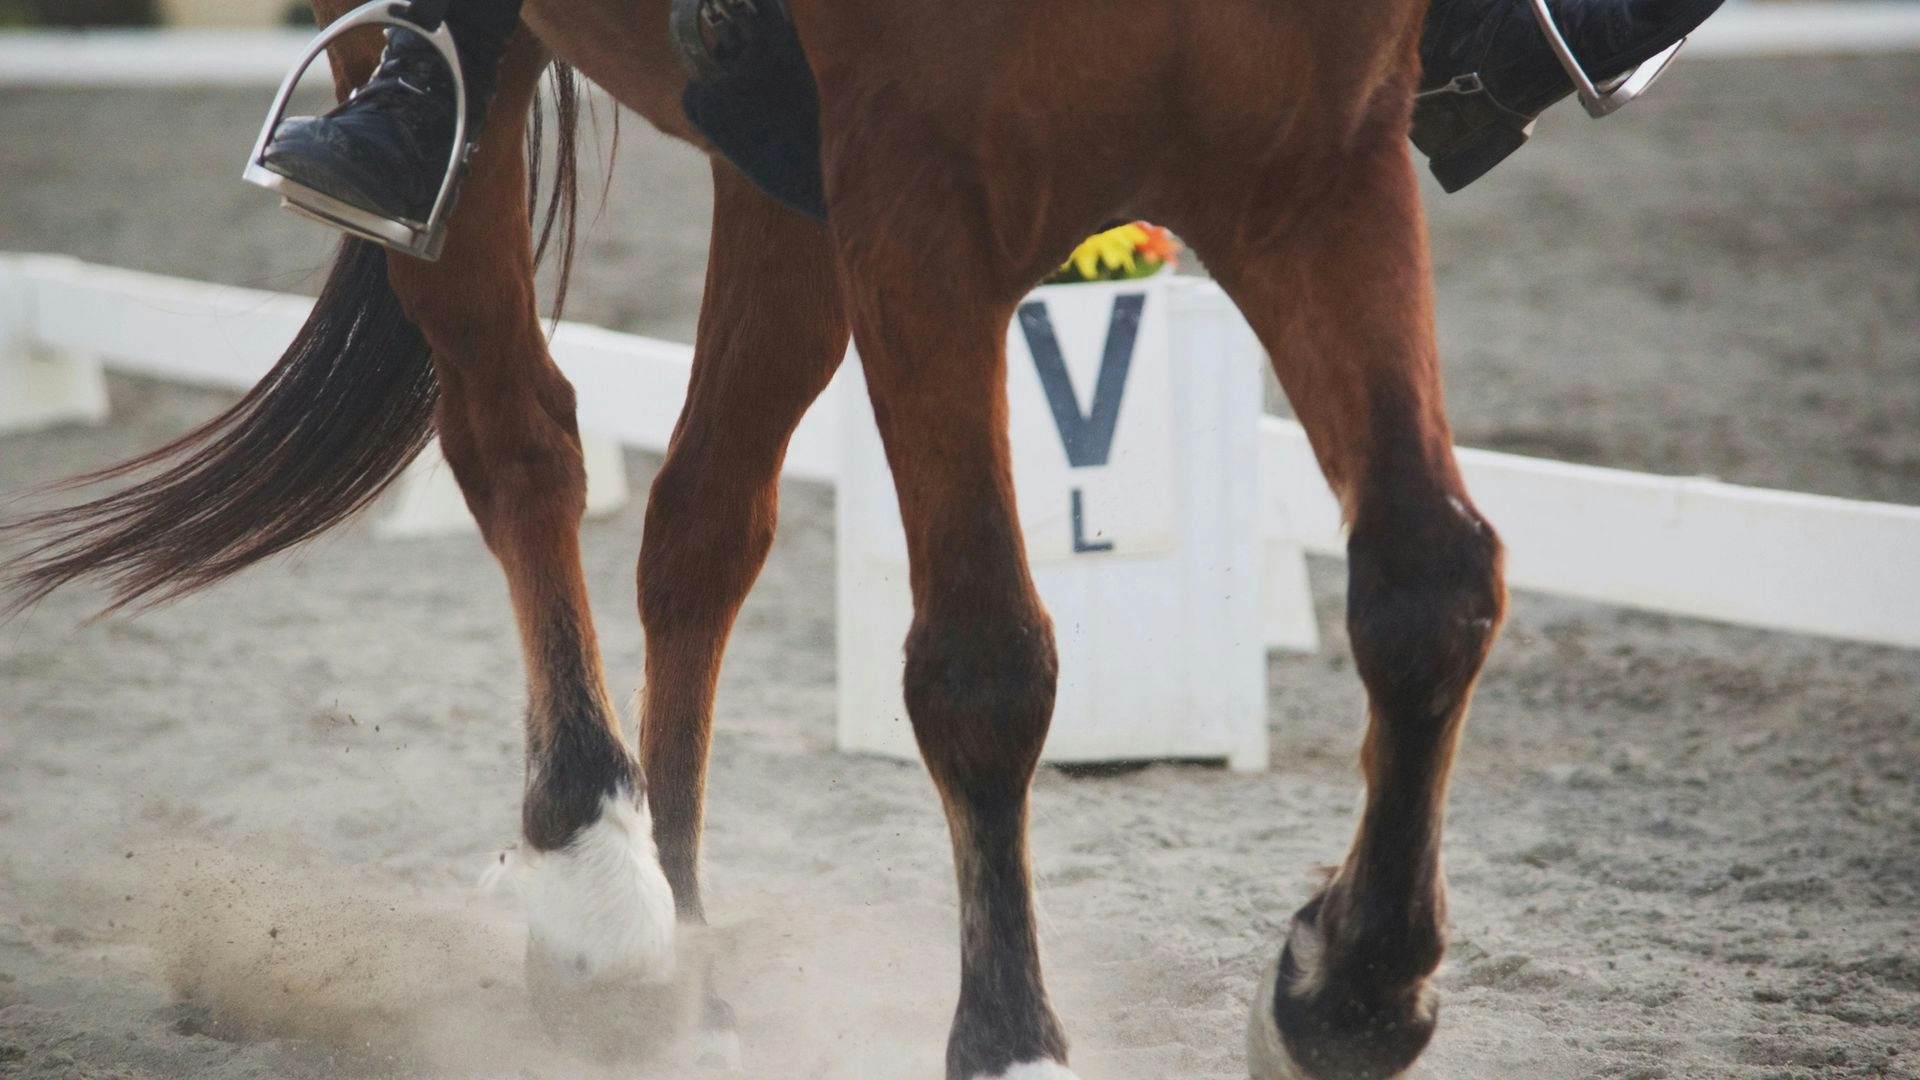 View of a dressage ring letters V and L at ground level between a bay horse's legs. Horse is trotting down the long side.